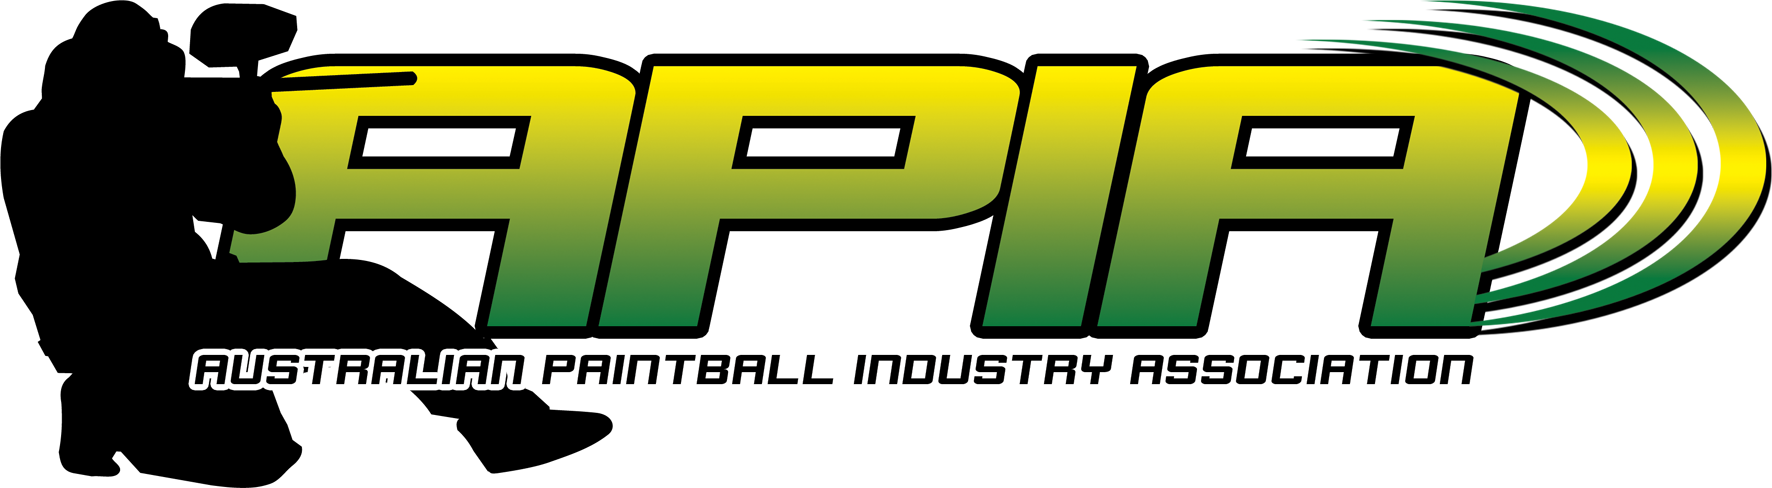 Campaigning For The Australian Paintball Industry - Industry (1772x488)